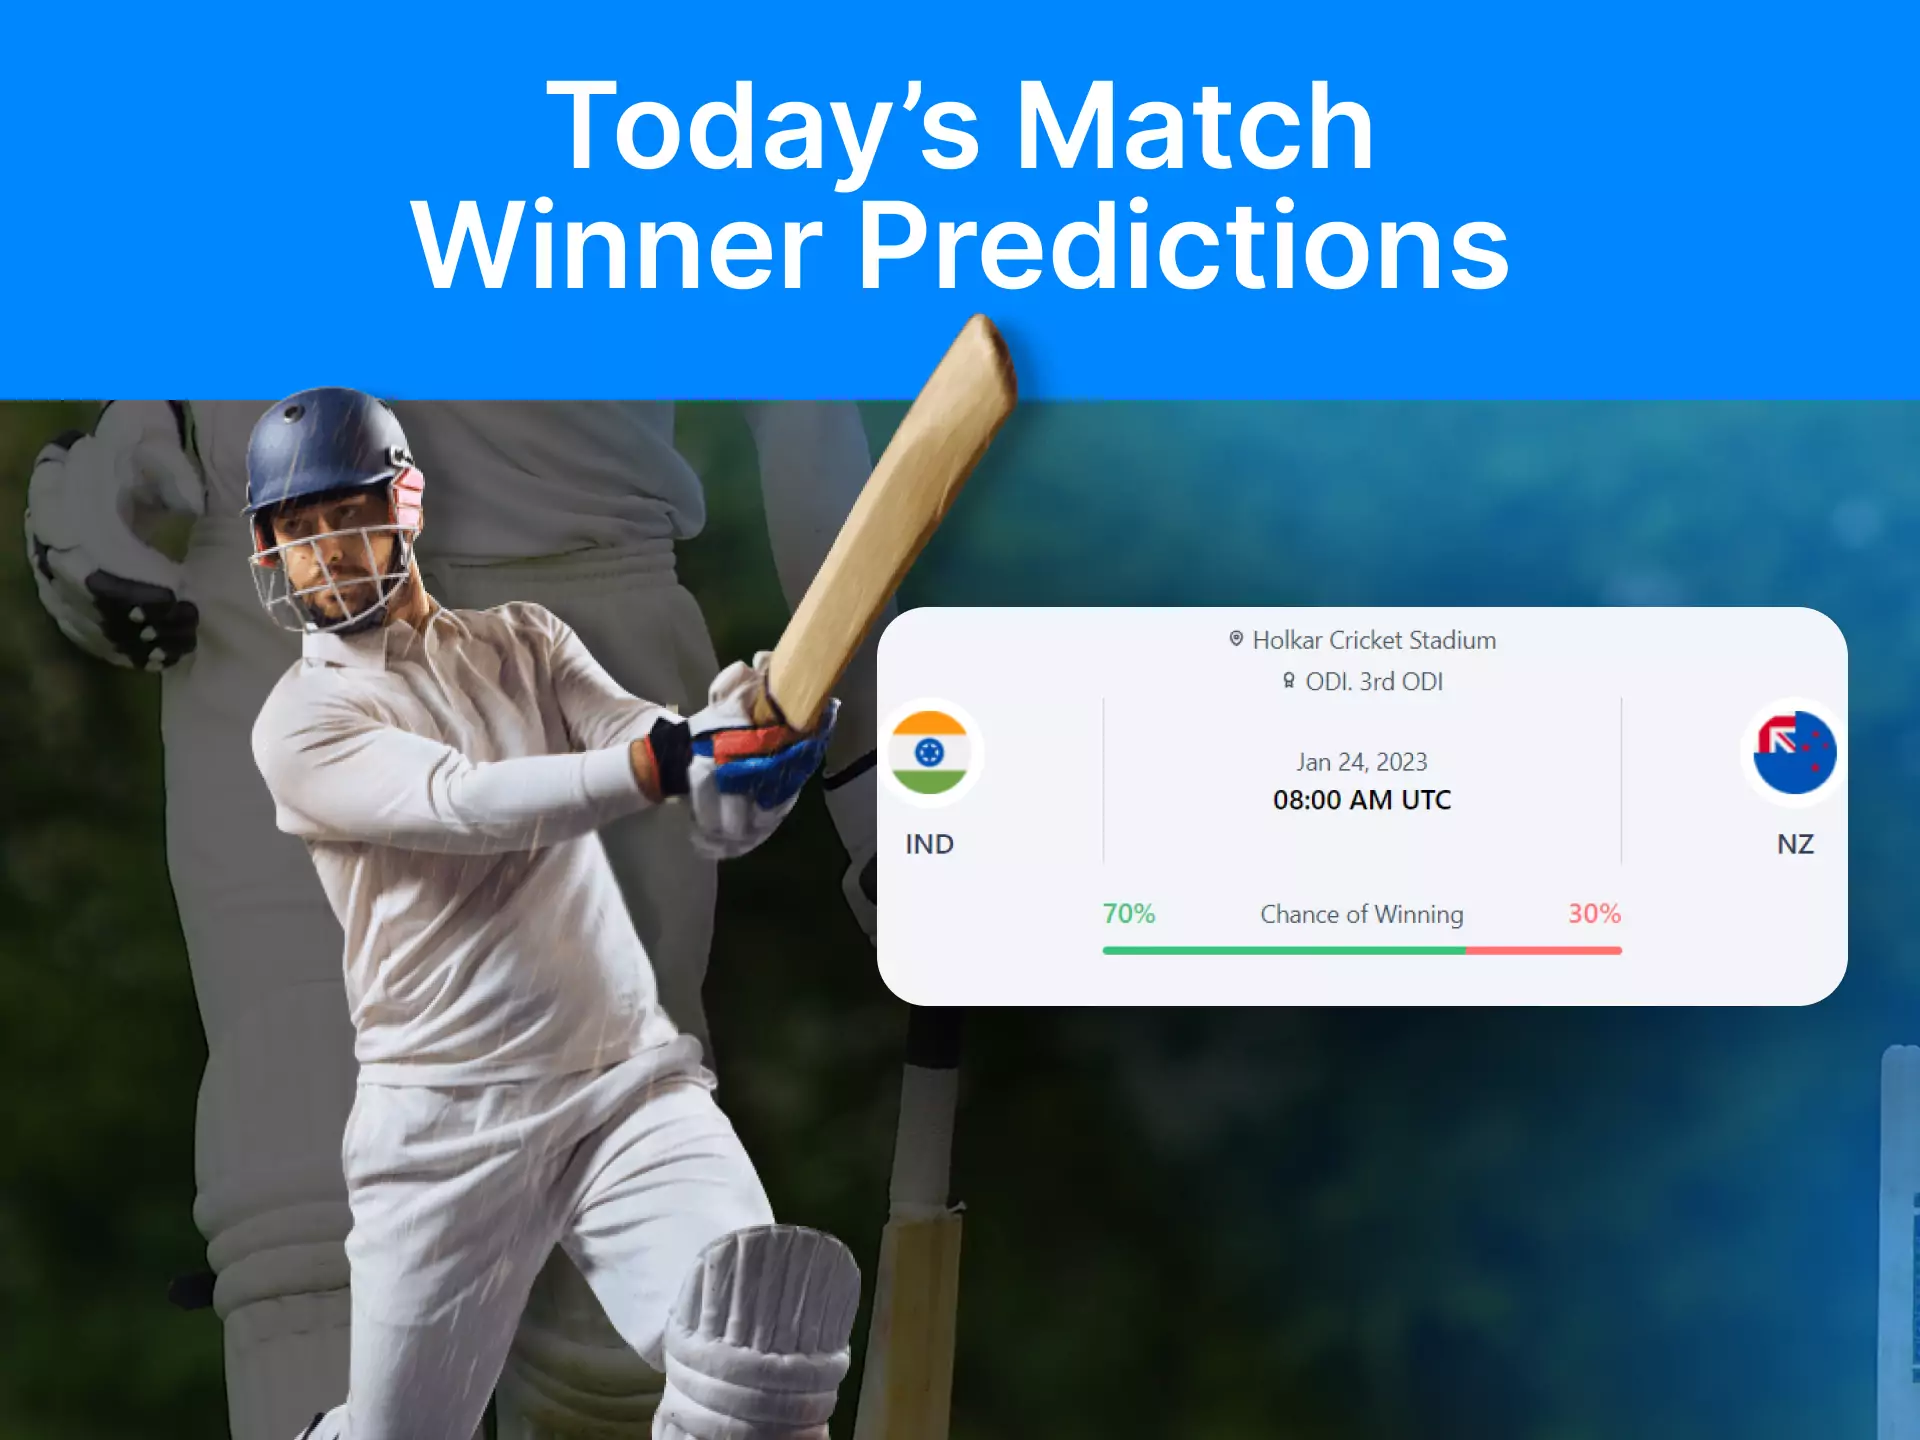 Try to bet and predict the winner of the match.